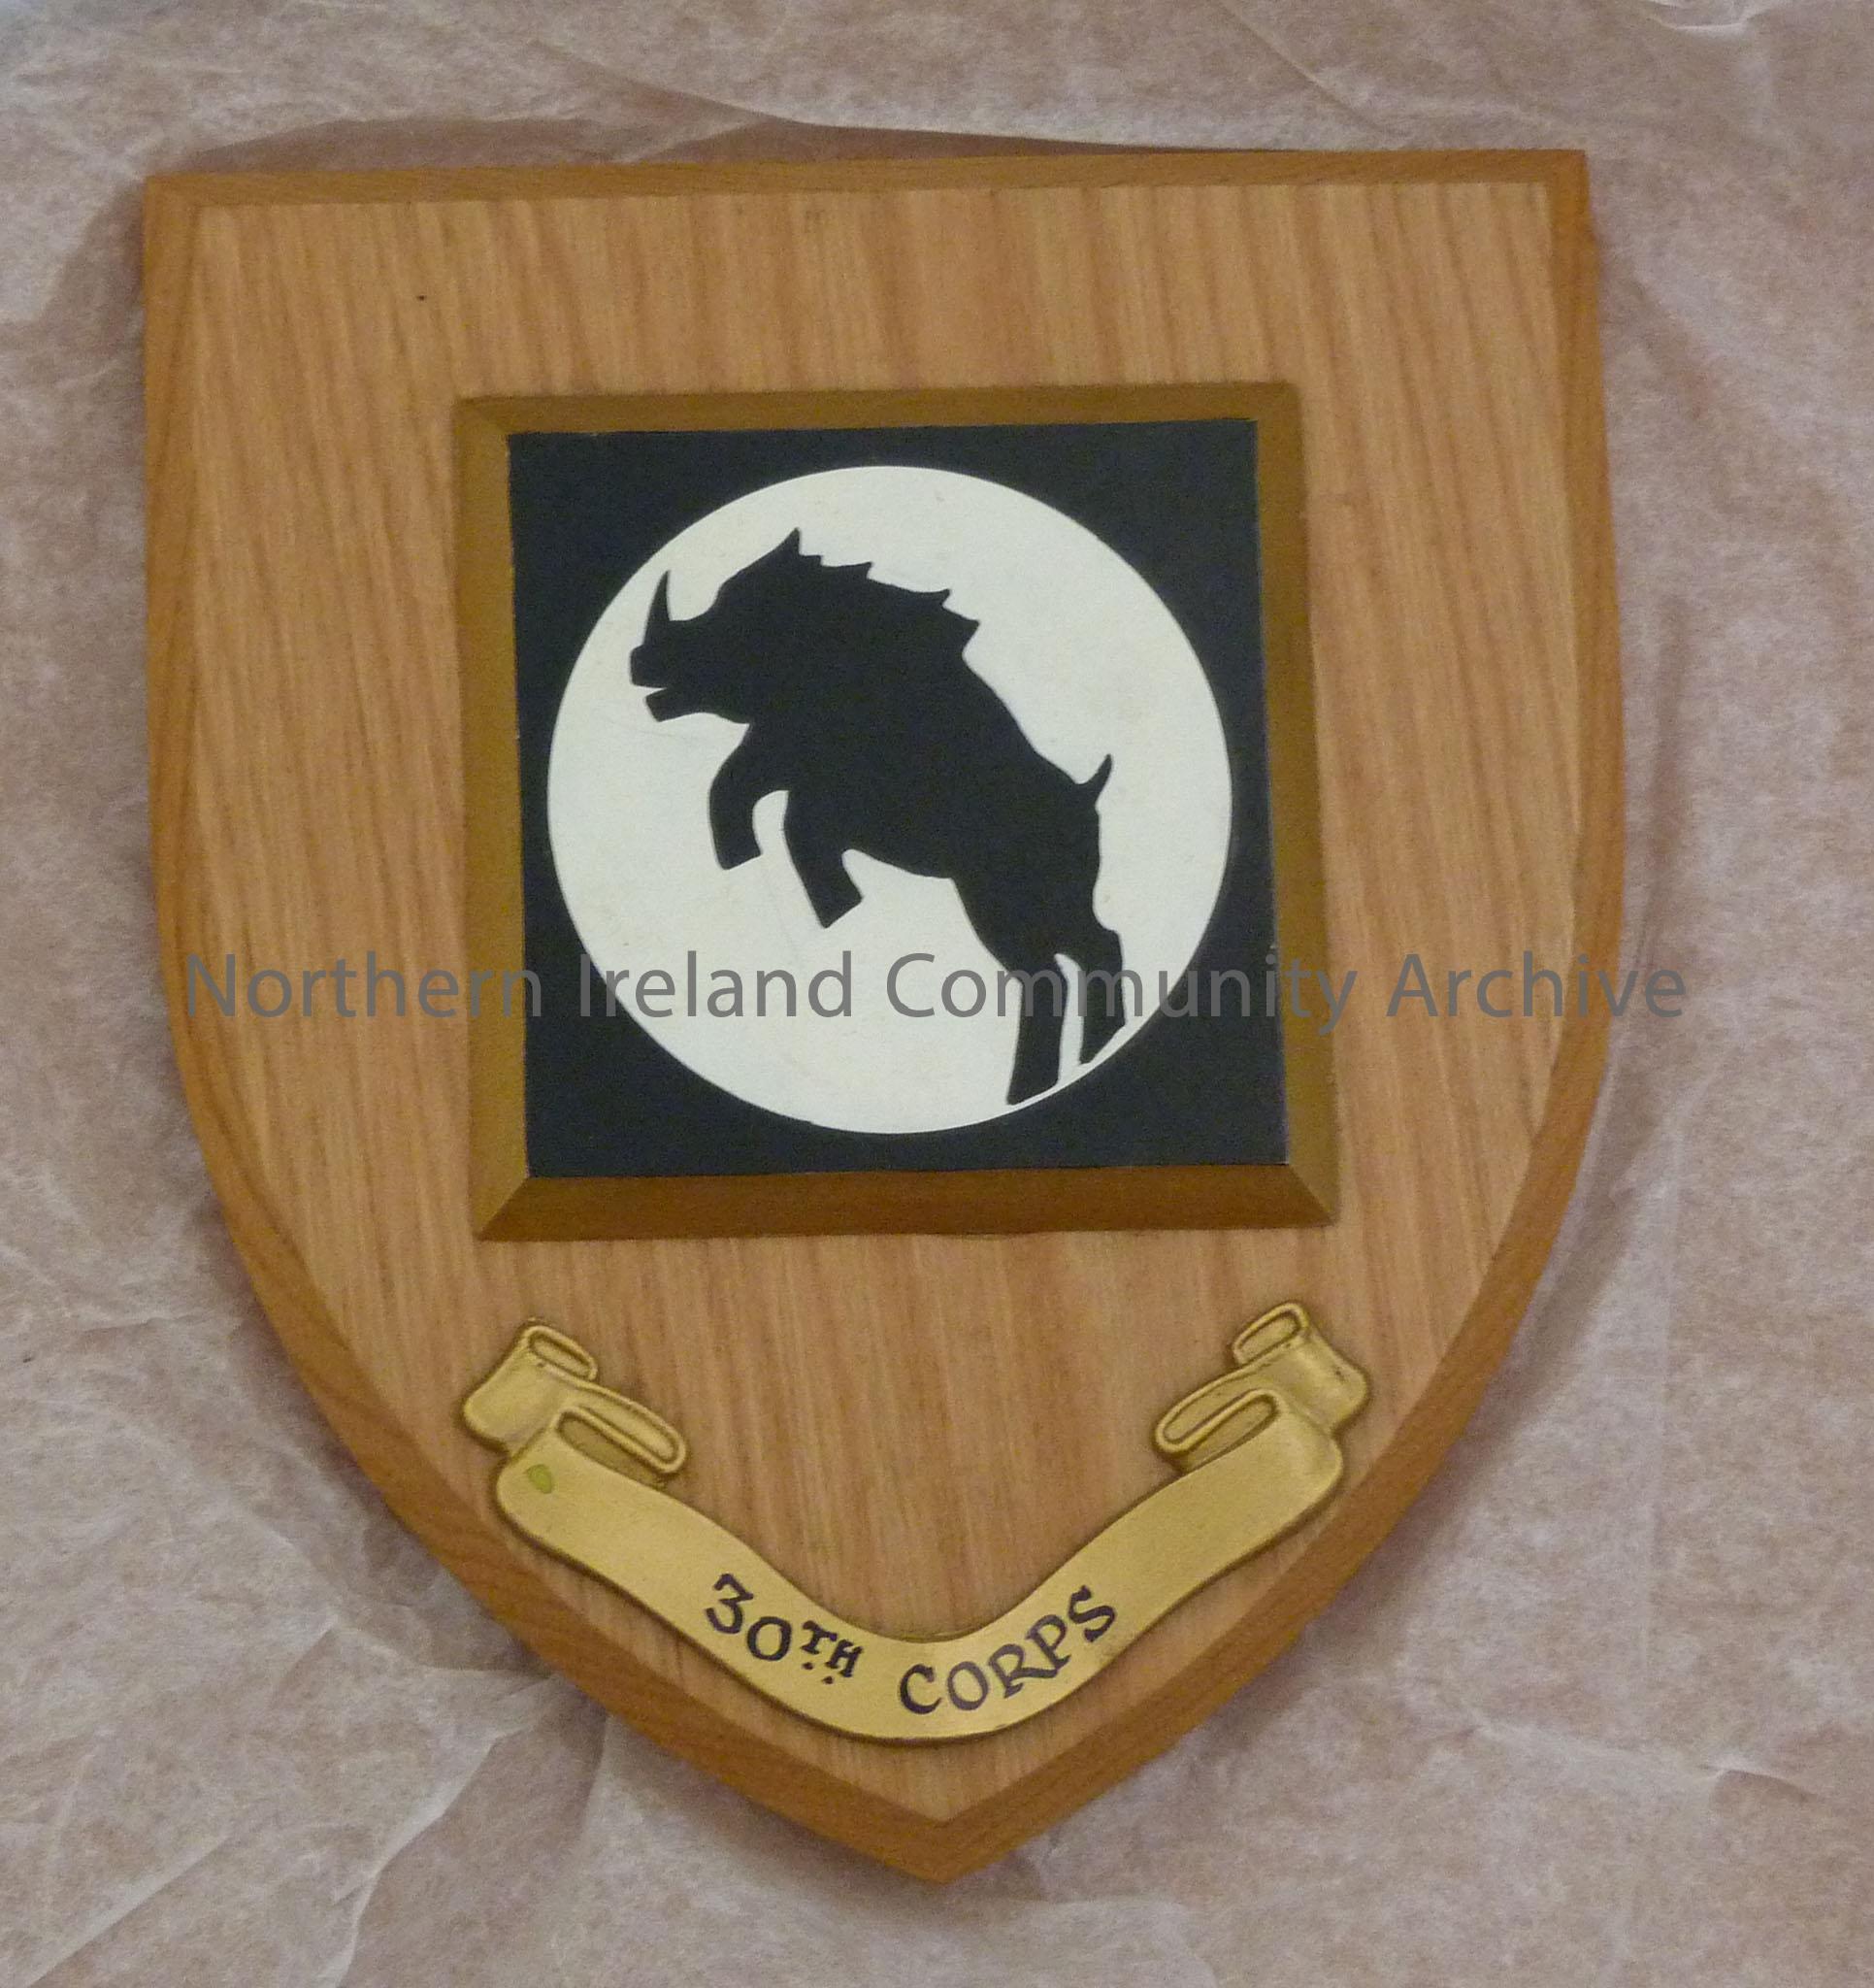 30th Corps shield with silhouette of a black boar in a white circle in a black square